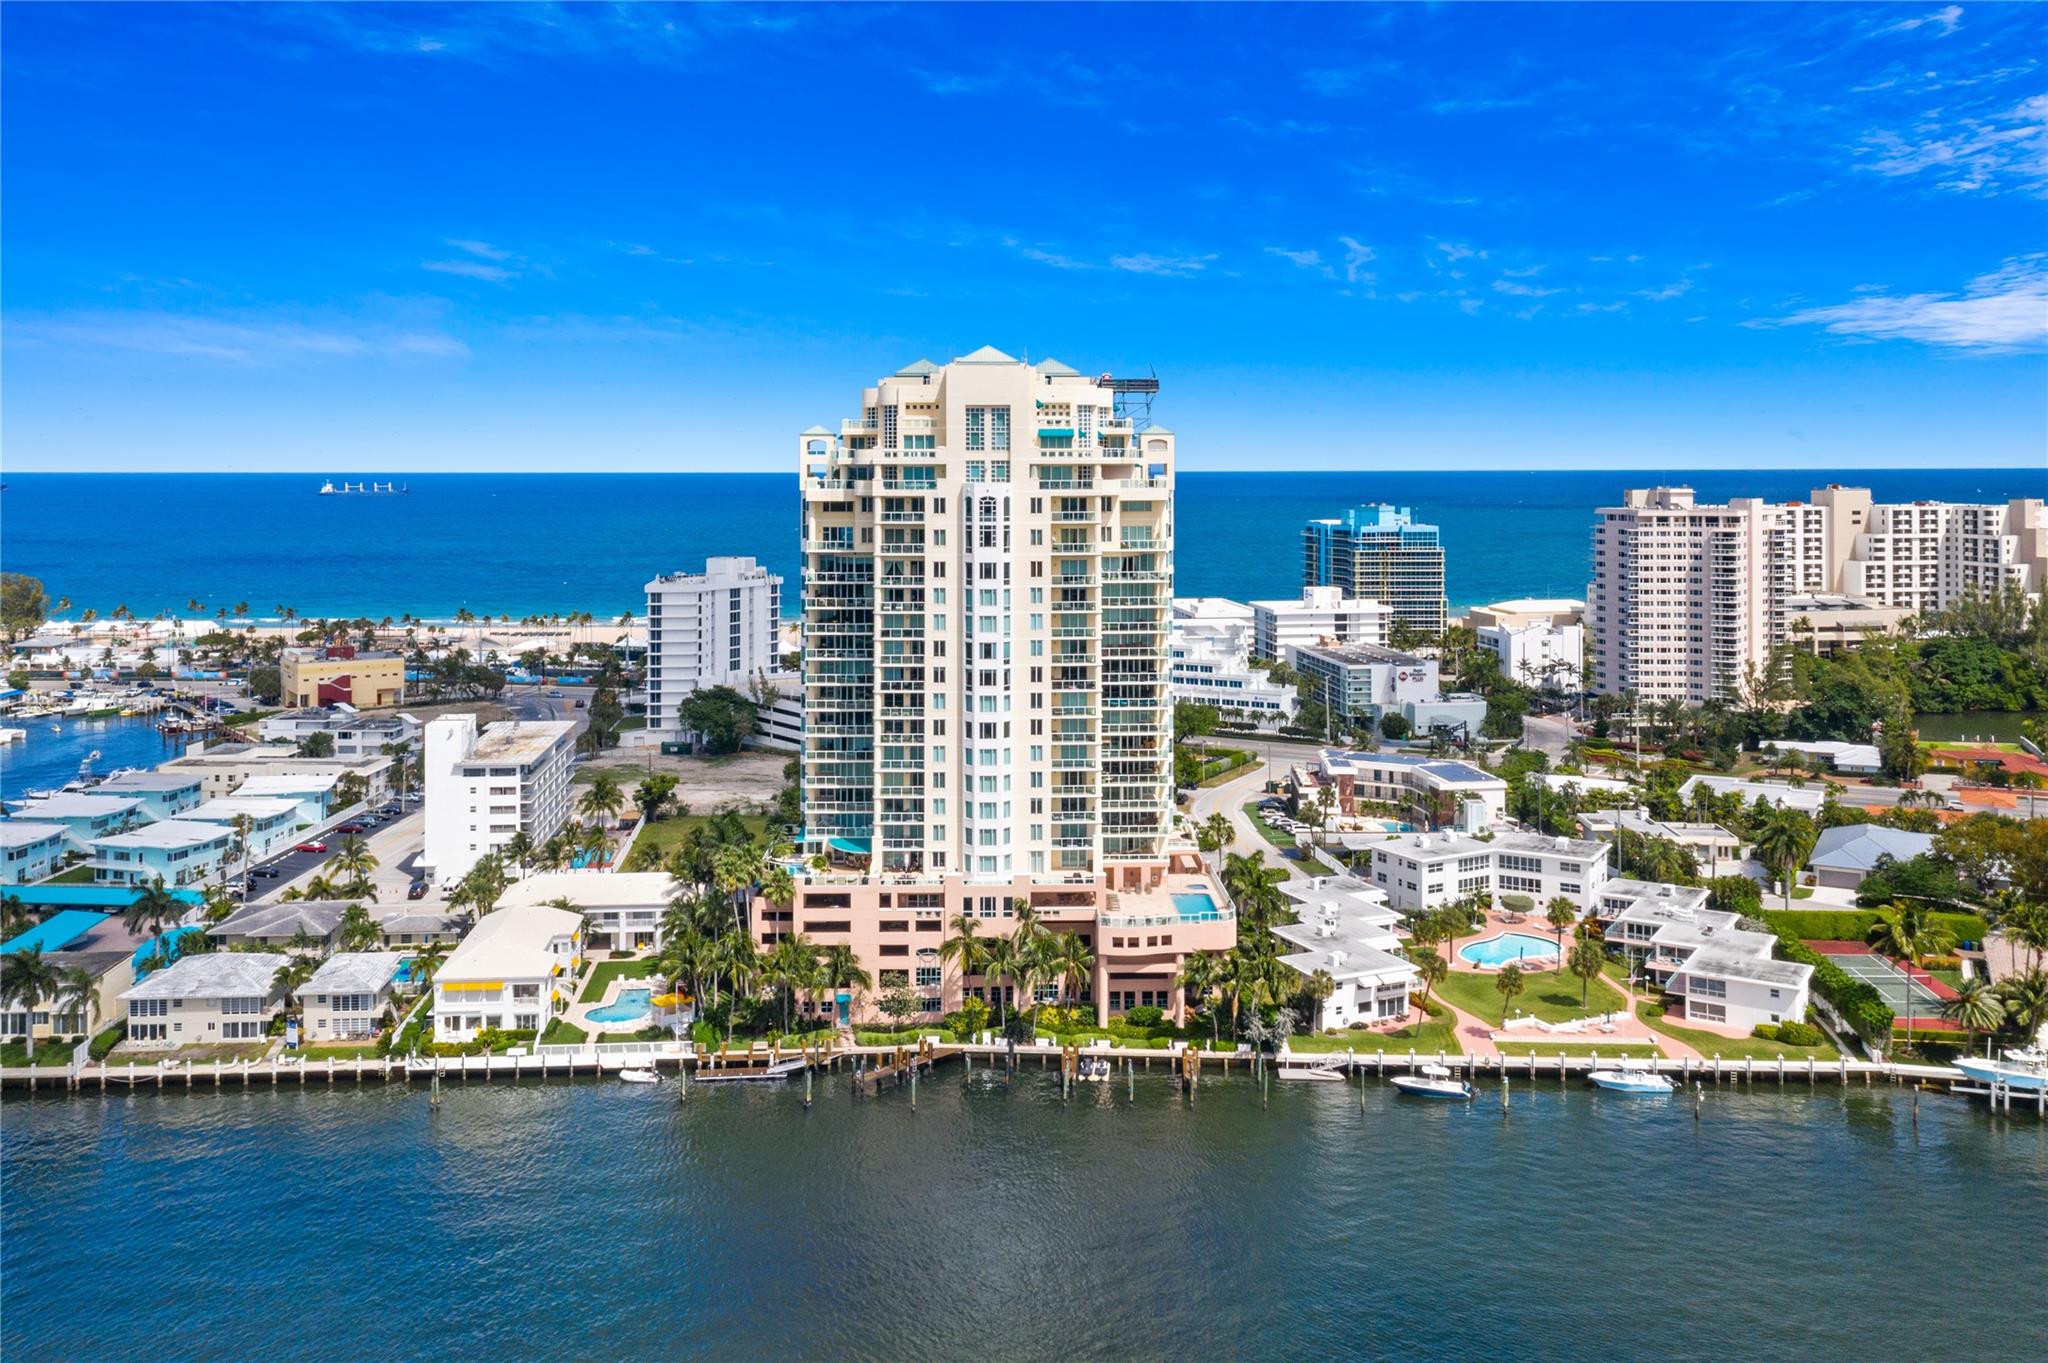 BEAUTIFUL REMODELED. SE CORNER WITH 601 FEET OF BALCONIES. INTRACOASTAL AND CITY SKYLINE VIEWS. OPEN FLOOR PLAN WITH GOURMET KITCHEN AND MARBLE FLOORS THROUGHOUT. 4 BEDROOMS AND 3 AND HALF BATHS. 24 HOUSE SECURITY. CAN BE RENTED FURNISHED OR UNFURNISHED.